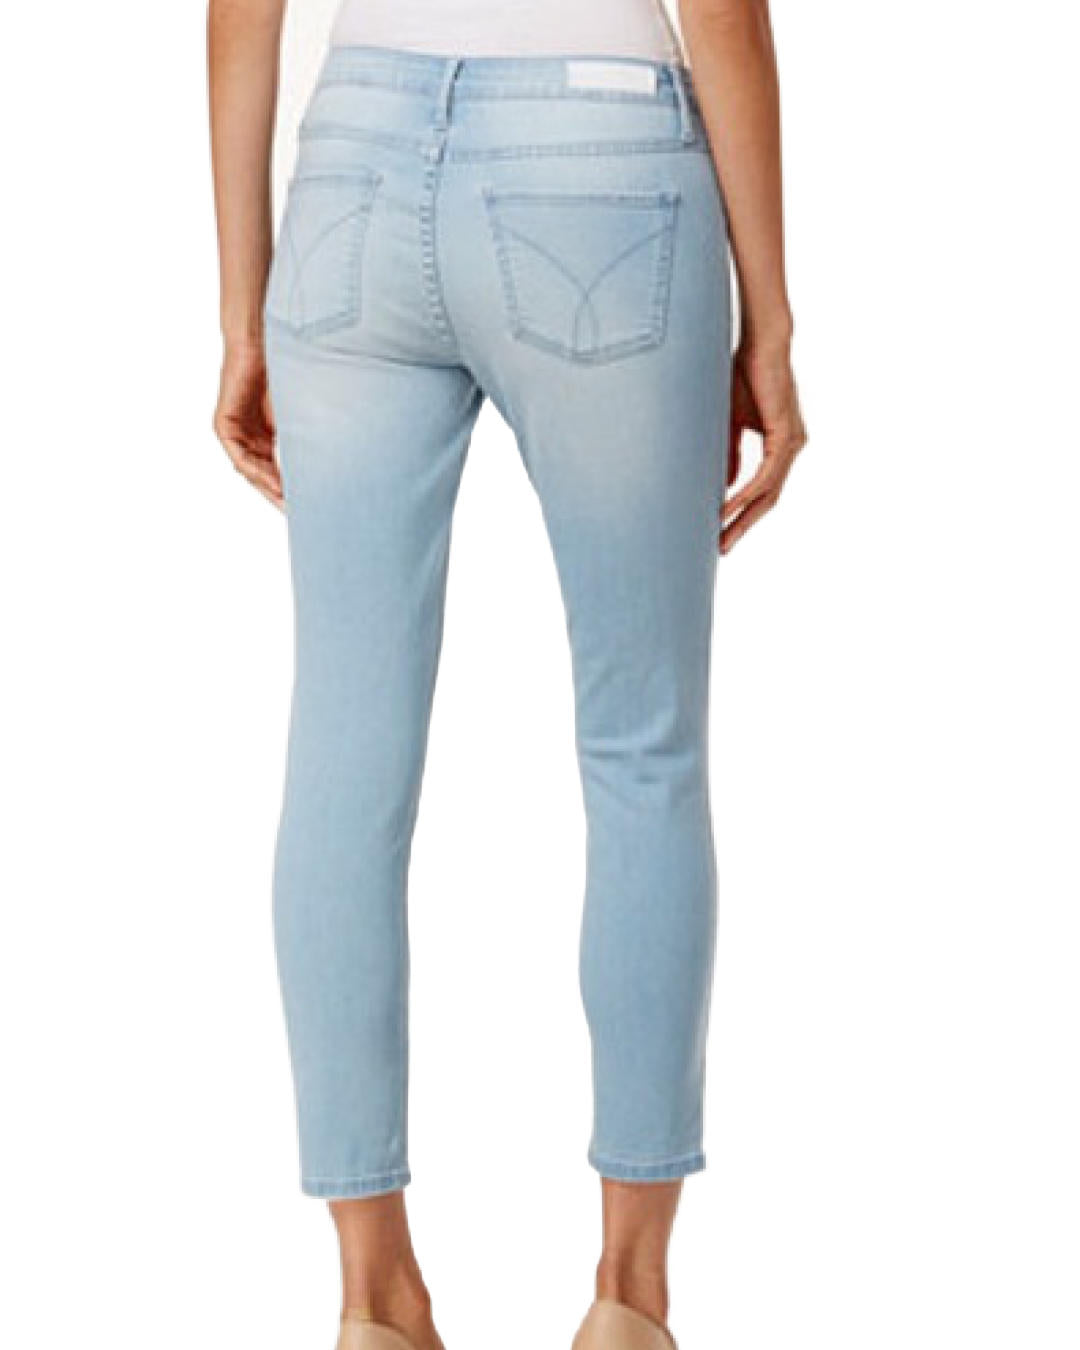 Calvin Klein Womens Skinny Ankle Jeans